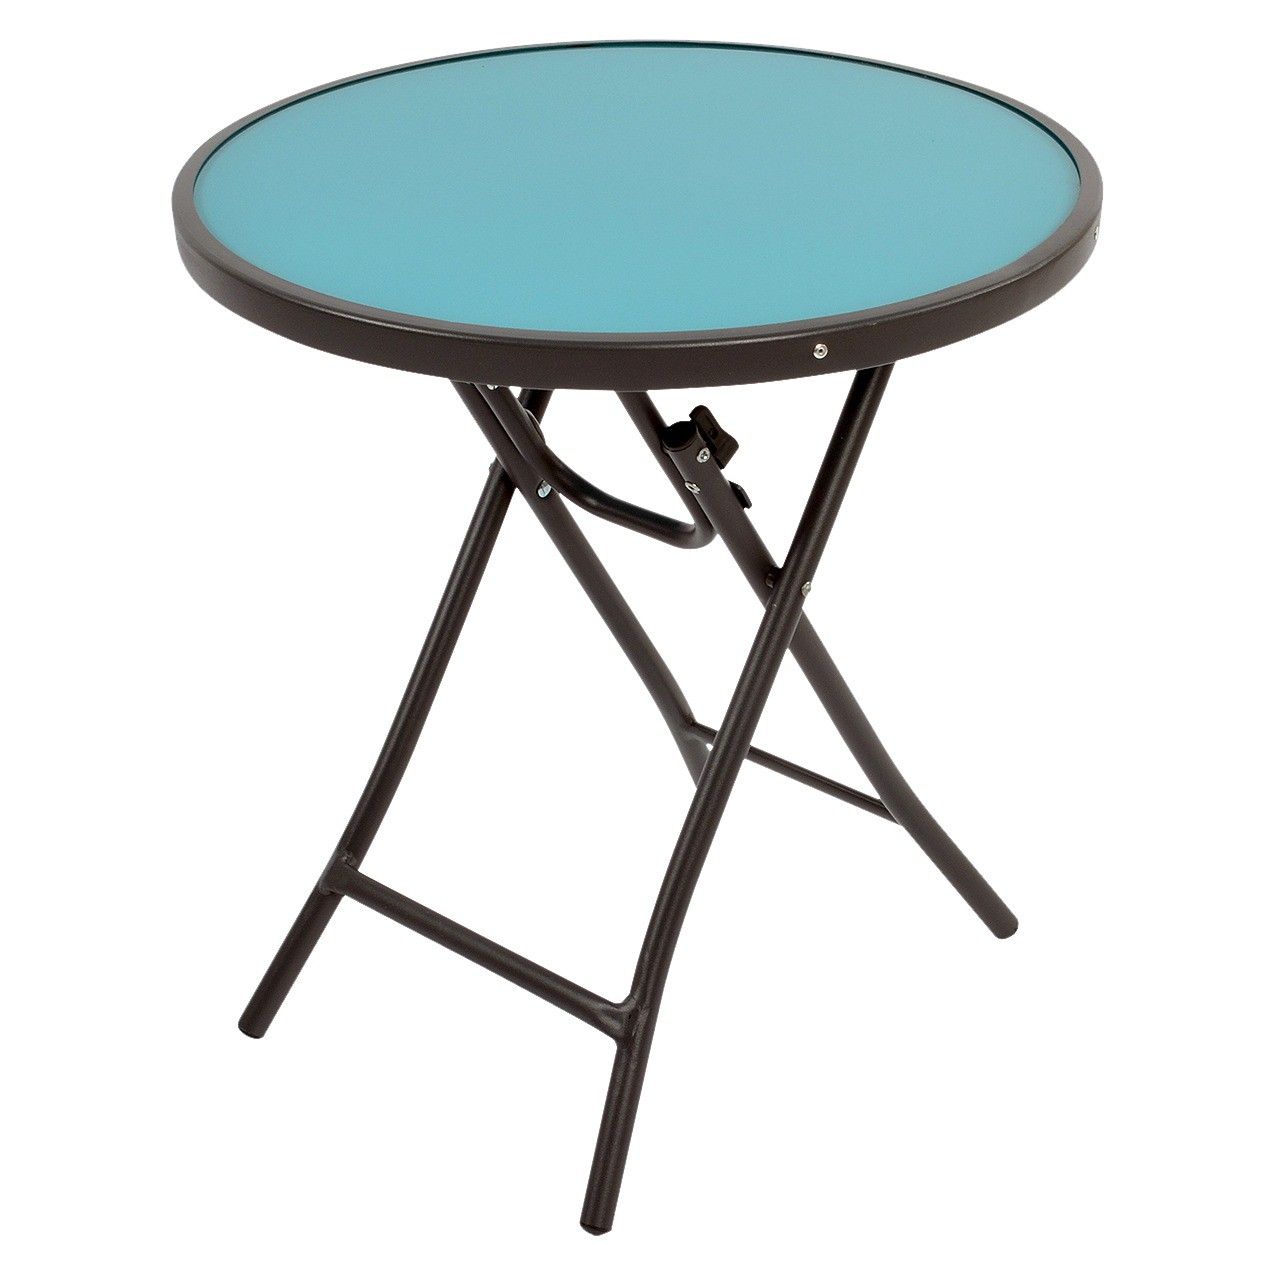 bistro accent table turq target patio patios room essentials metal turquoise ikea outdoor west elm mid century bedside exterior small couch wade furniture teton sets clear lucite